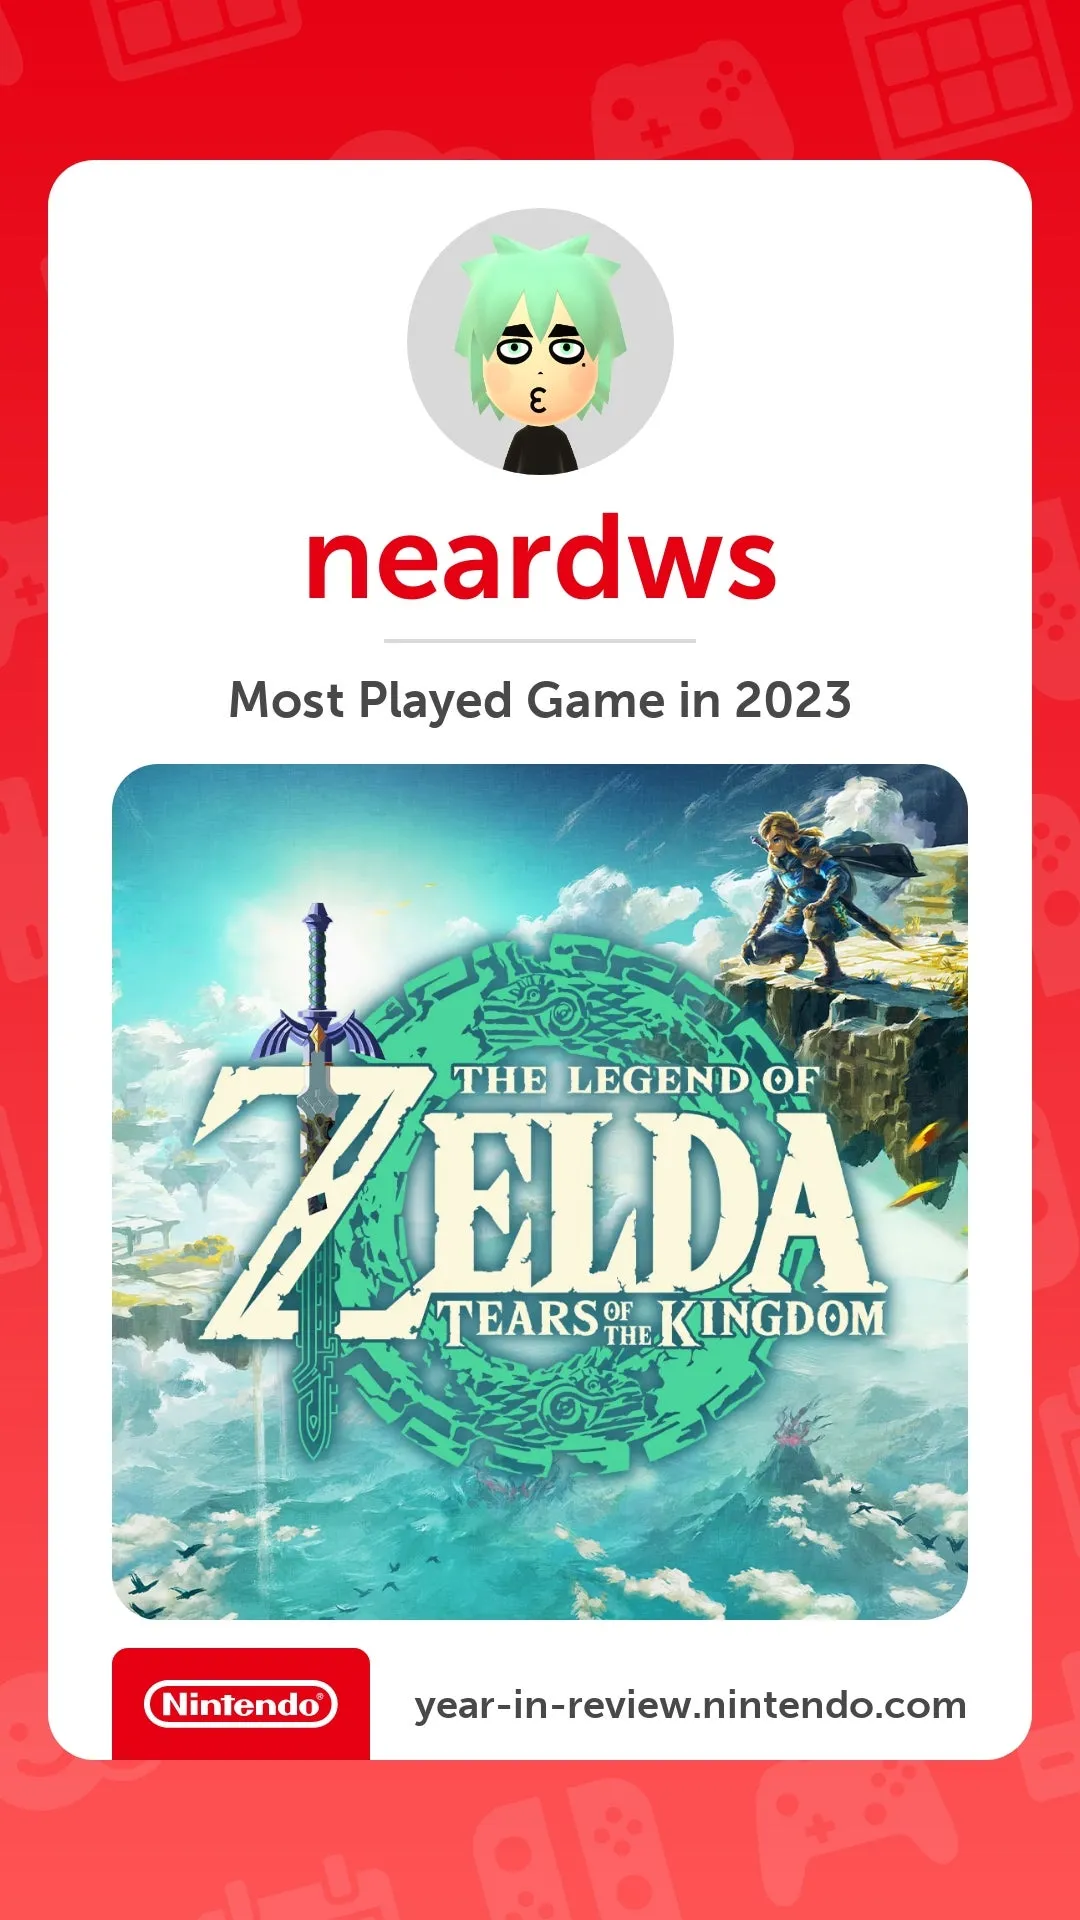 Nintendo Year in Review 2023